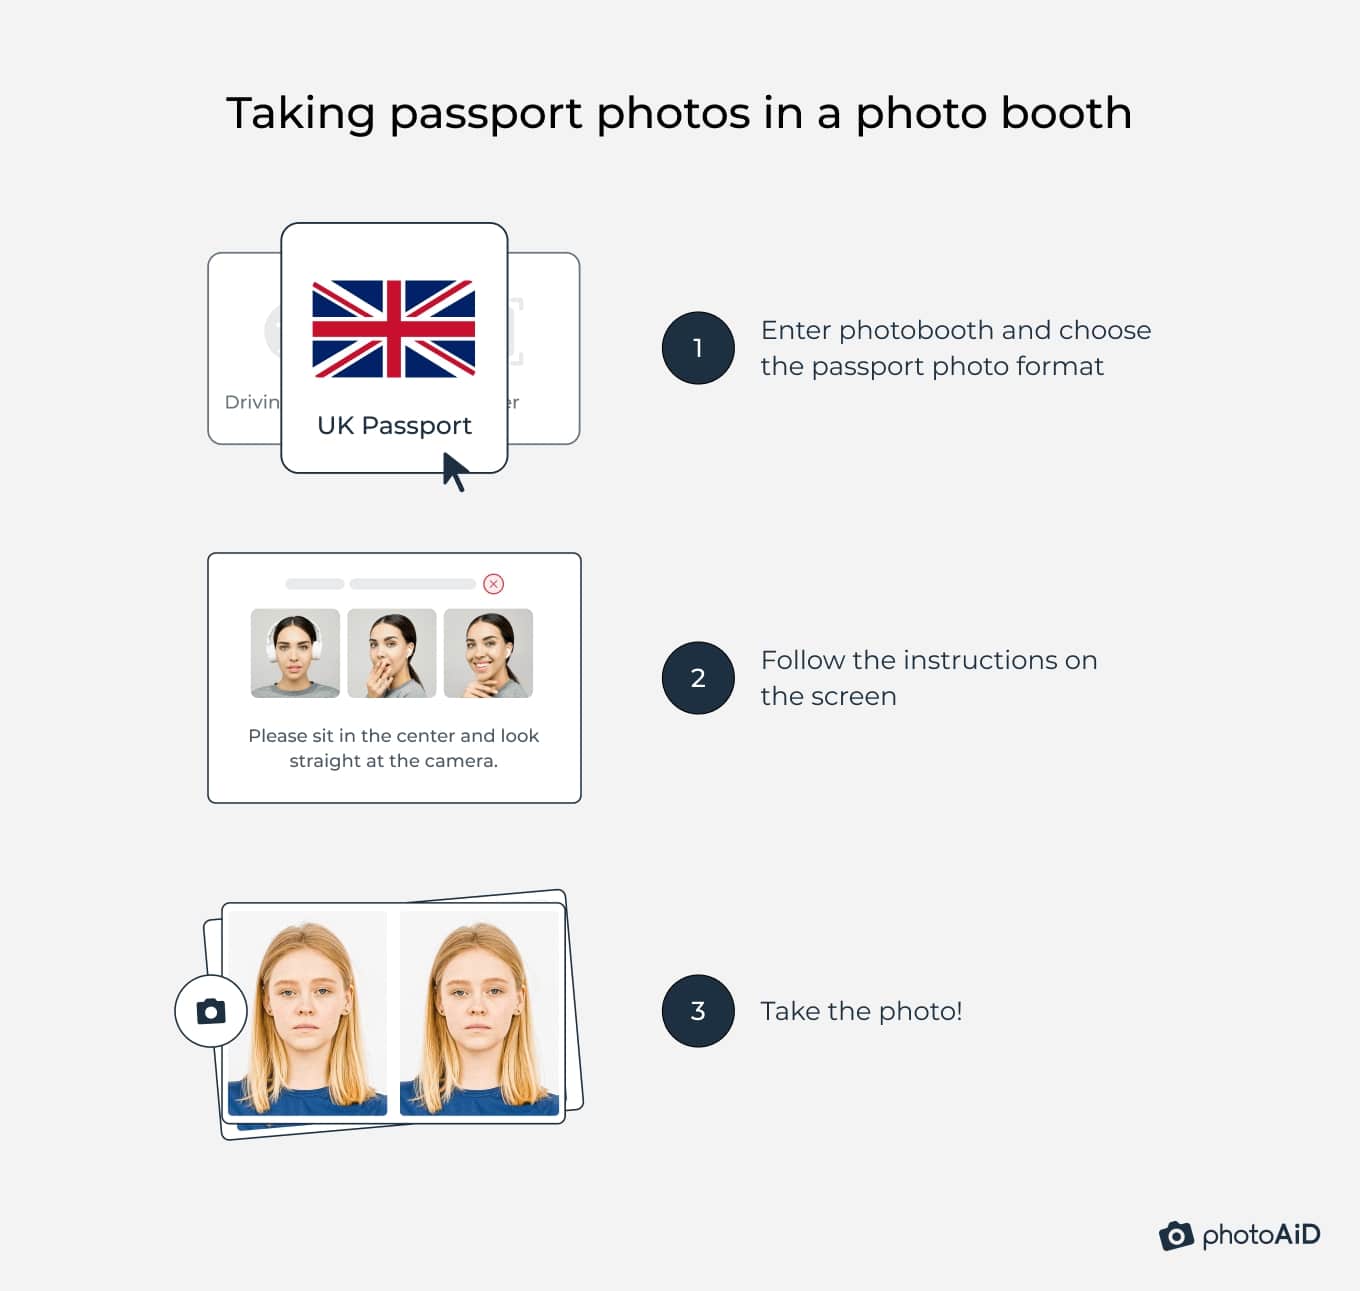 How to take a passport photo in a photo booth.